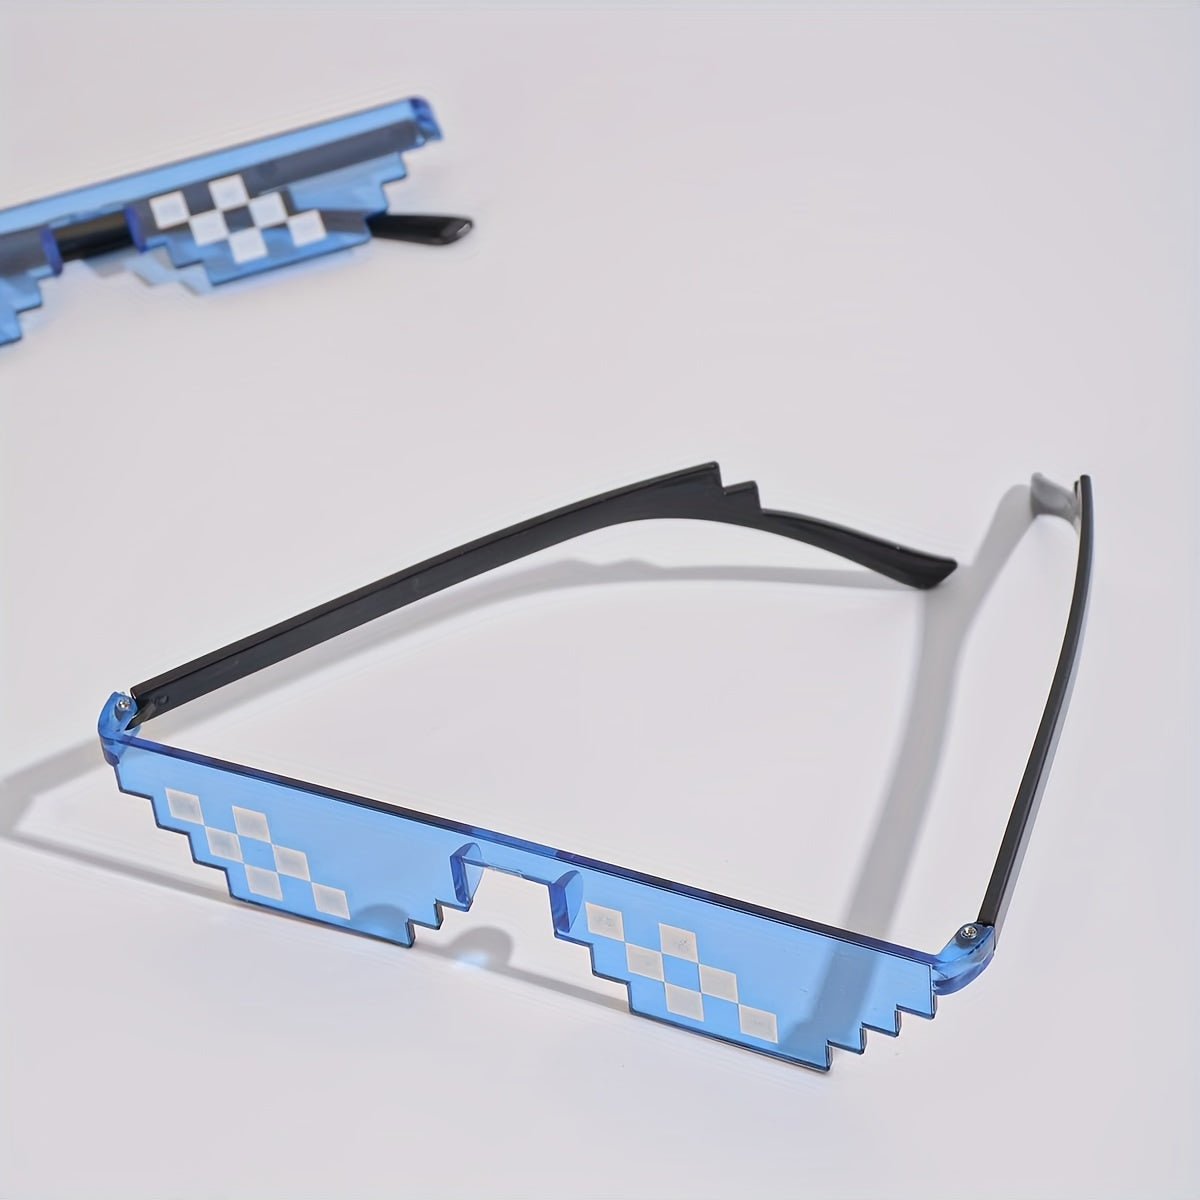 Festival Party Props Party Photo Props Mosaic Funny Party Glasses Anime Pixel Glasses, Cheap Stuff, Weird Stuff, Mini Stuff, Cute Aesthetic Stuff, Cool Gadgets, Unusual Items, Party Decor, Party Supplies 1pc,Xmas New Year Gifts